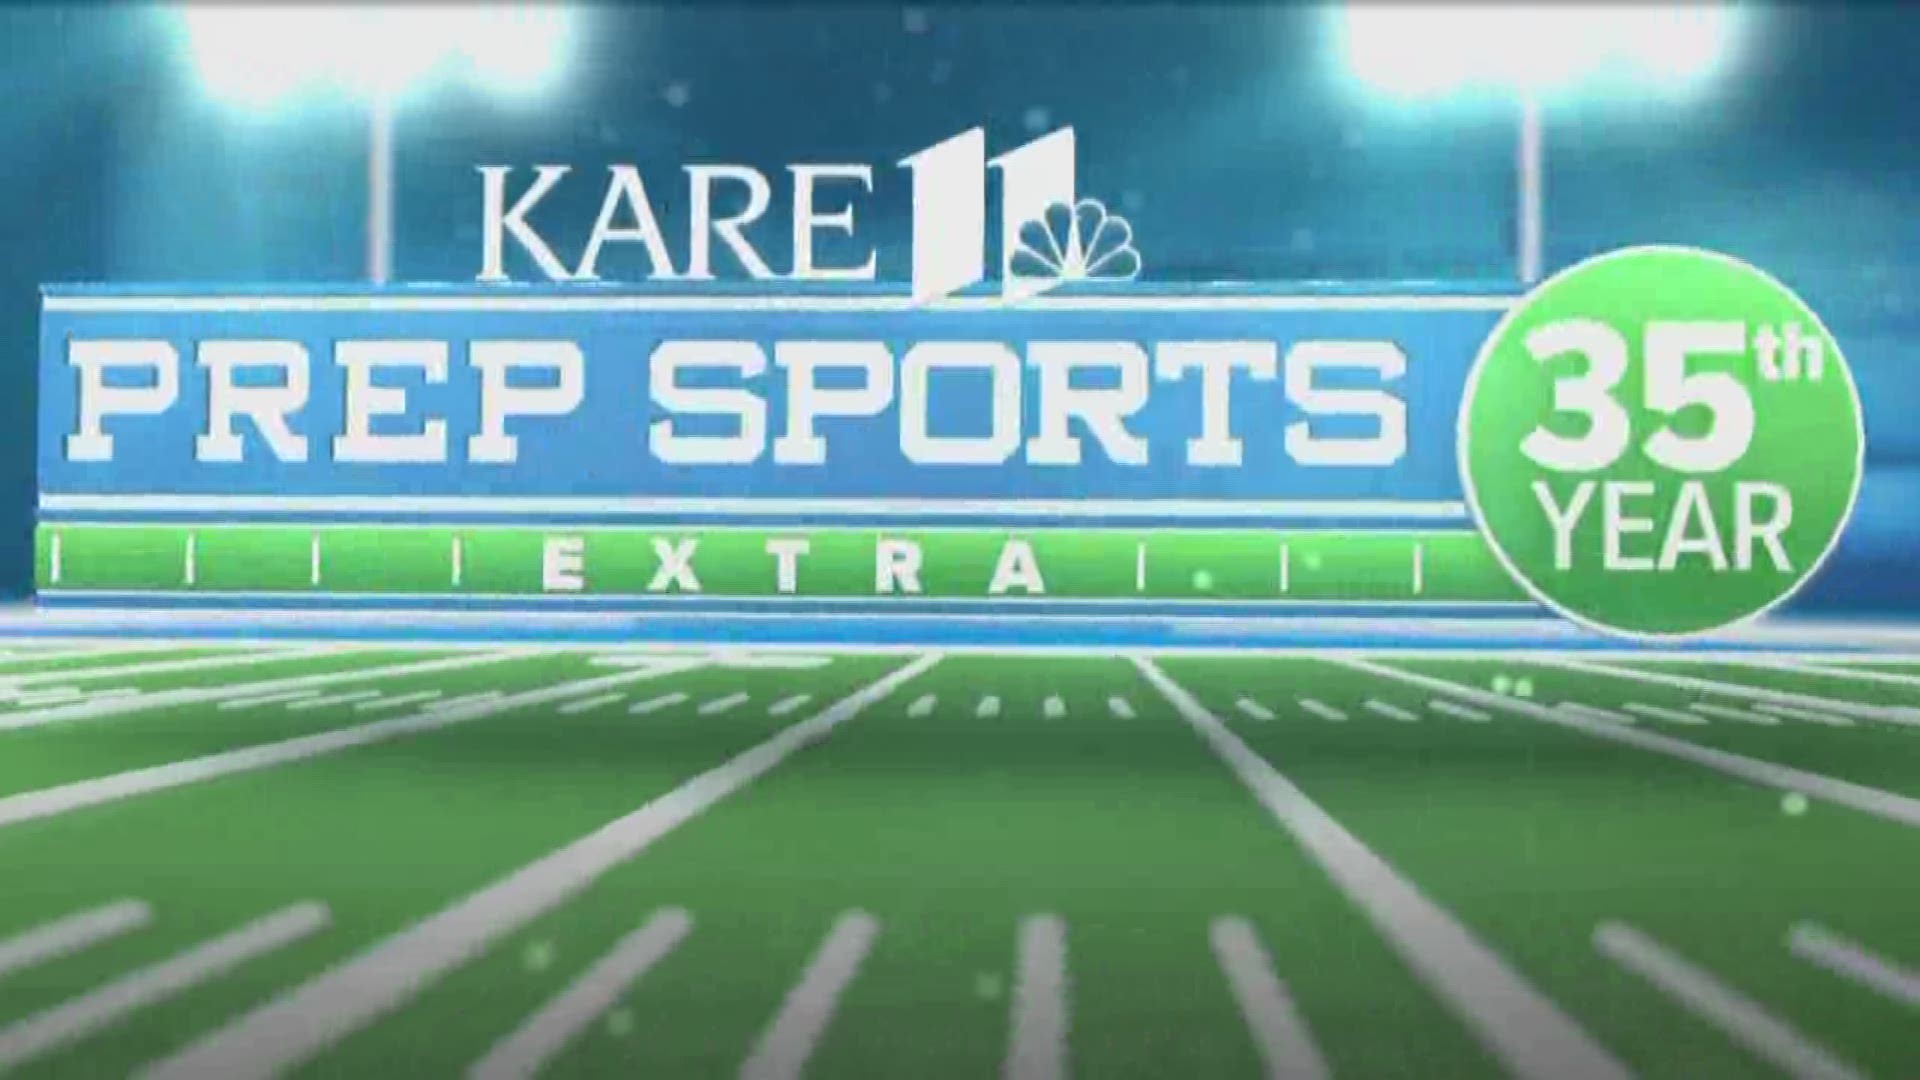 It's Randy Shaver's 35th year celebrating high school football in Minnesota. Here's the KARE 11 Prep Sports Extra from Oct. 6, 2018. https://kare11.tv/2OFJbMa